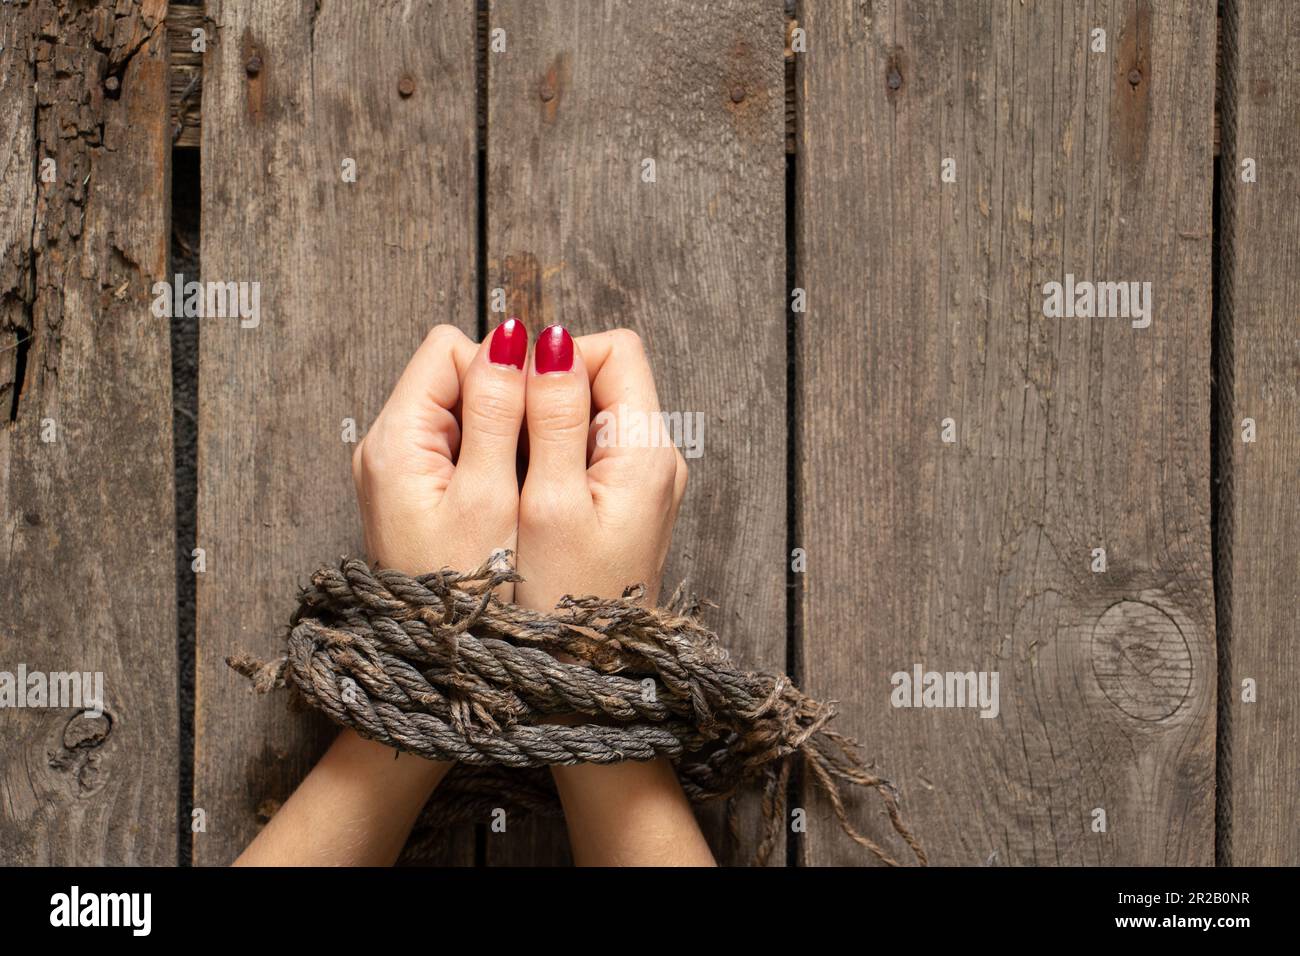 tied female hands with rope on wooden background close up Stock Photo